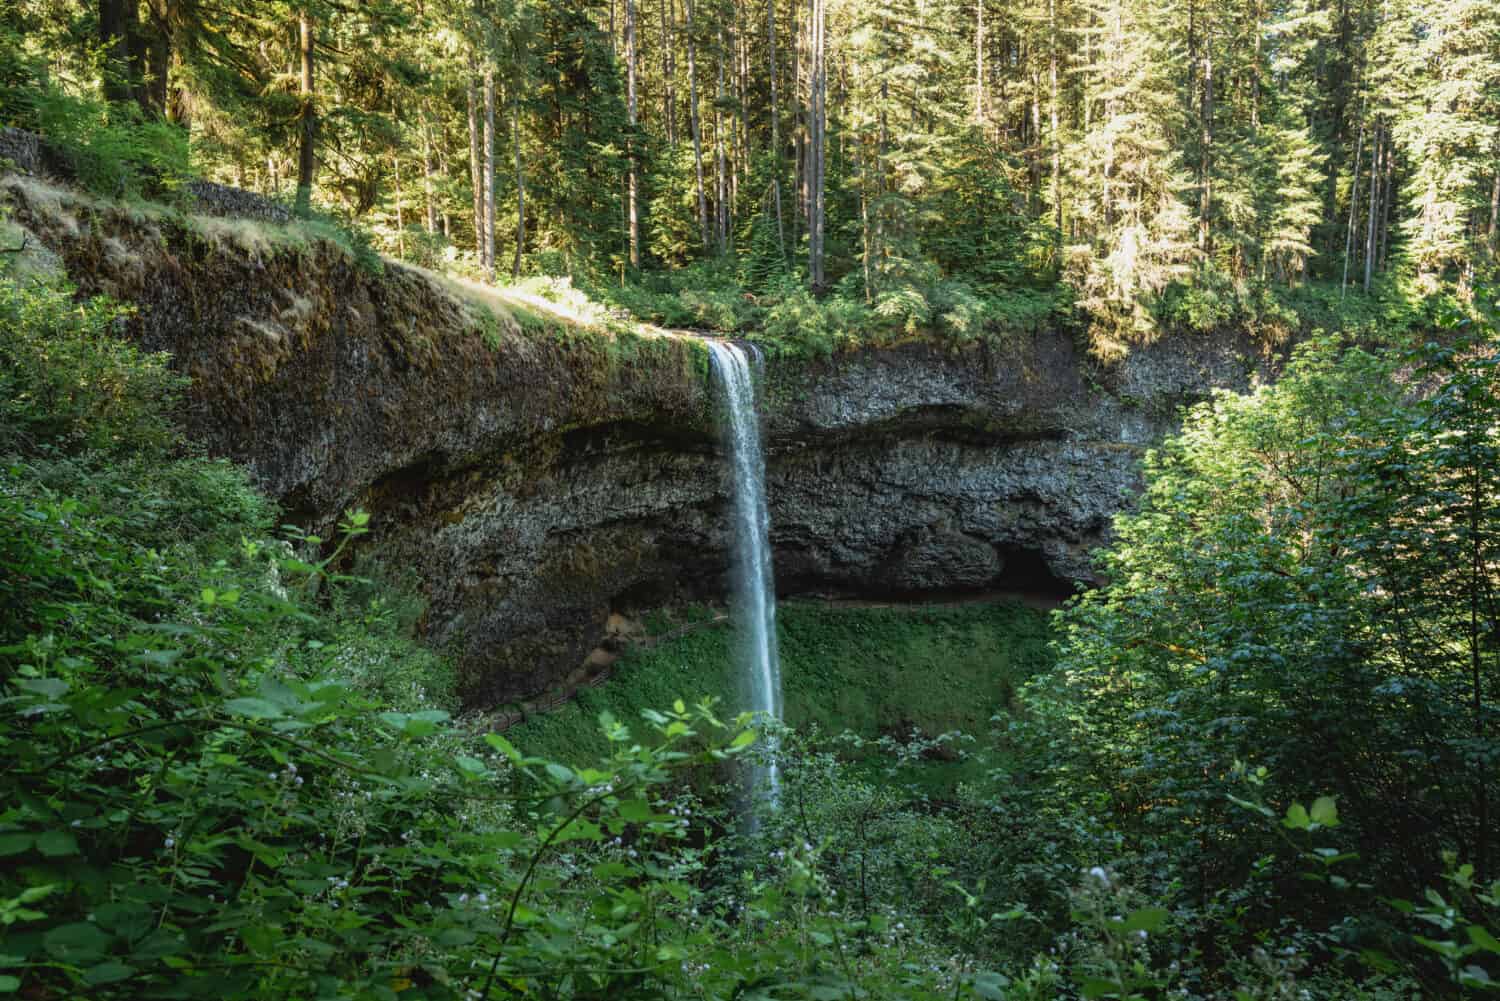 The South Falls at Silver Falls State Park - Trail of Ten Falls